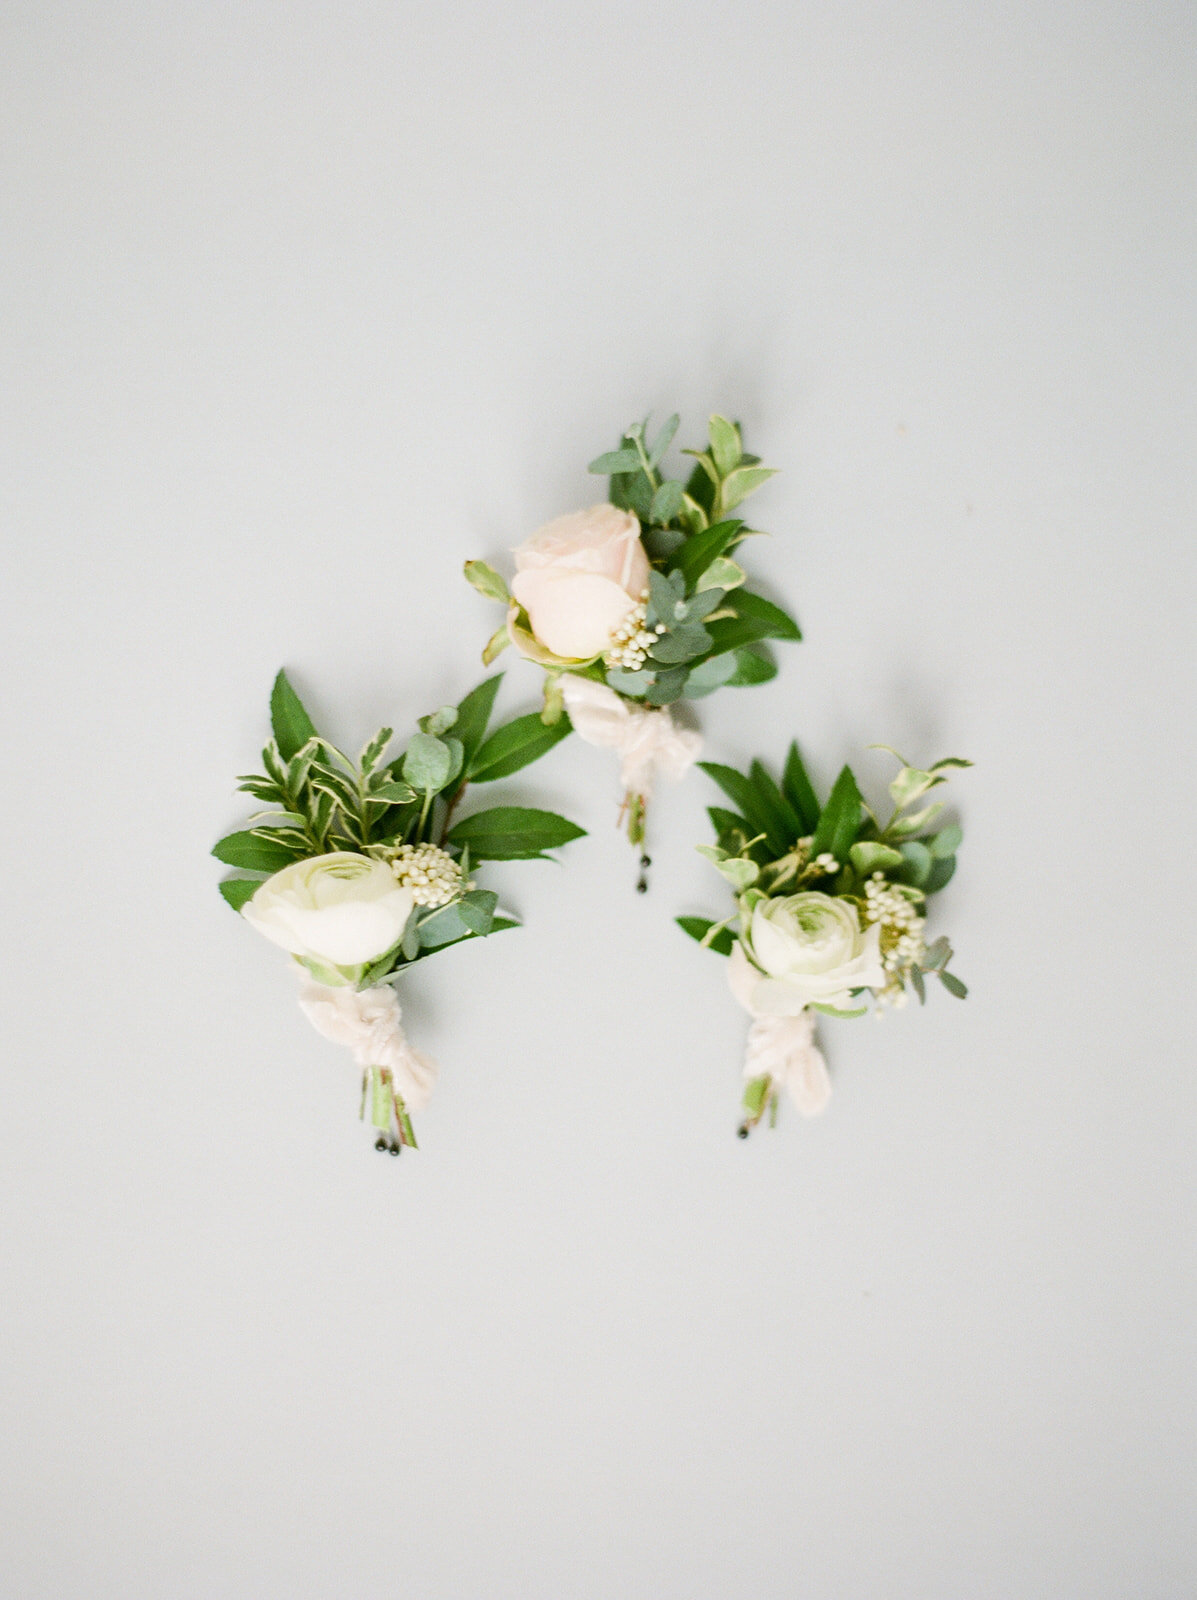 Blush and ivory boutonnieres with textures and natural greenery. Nashville wedding florist.